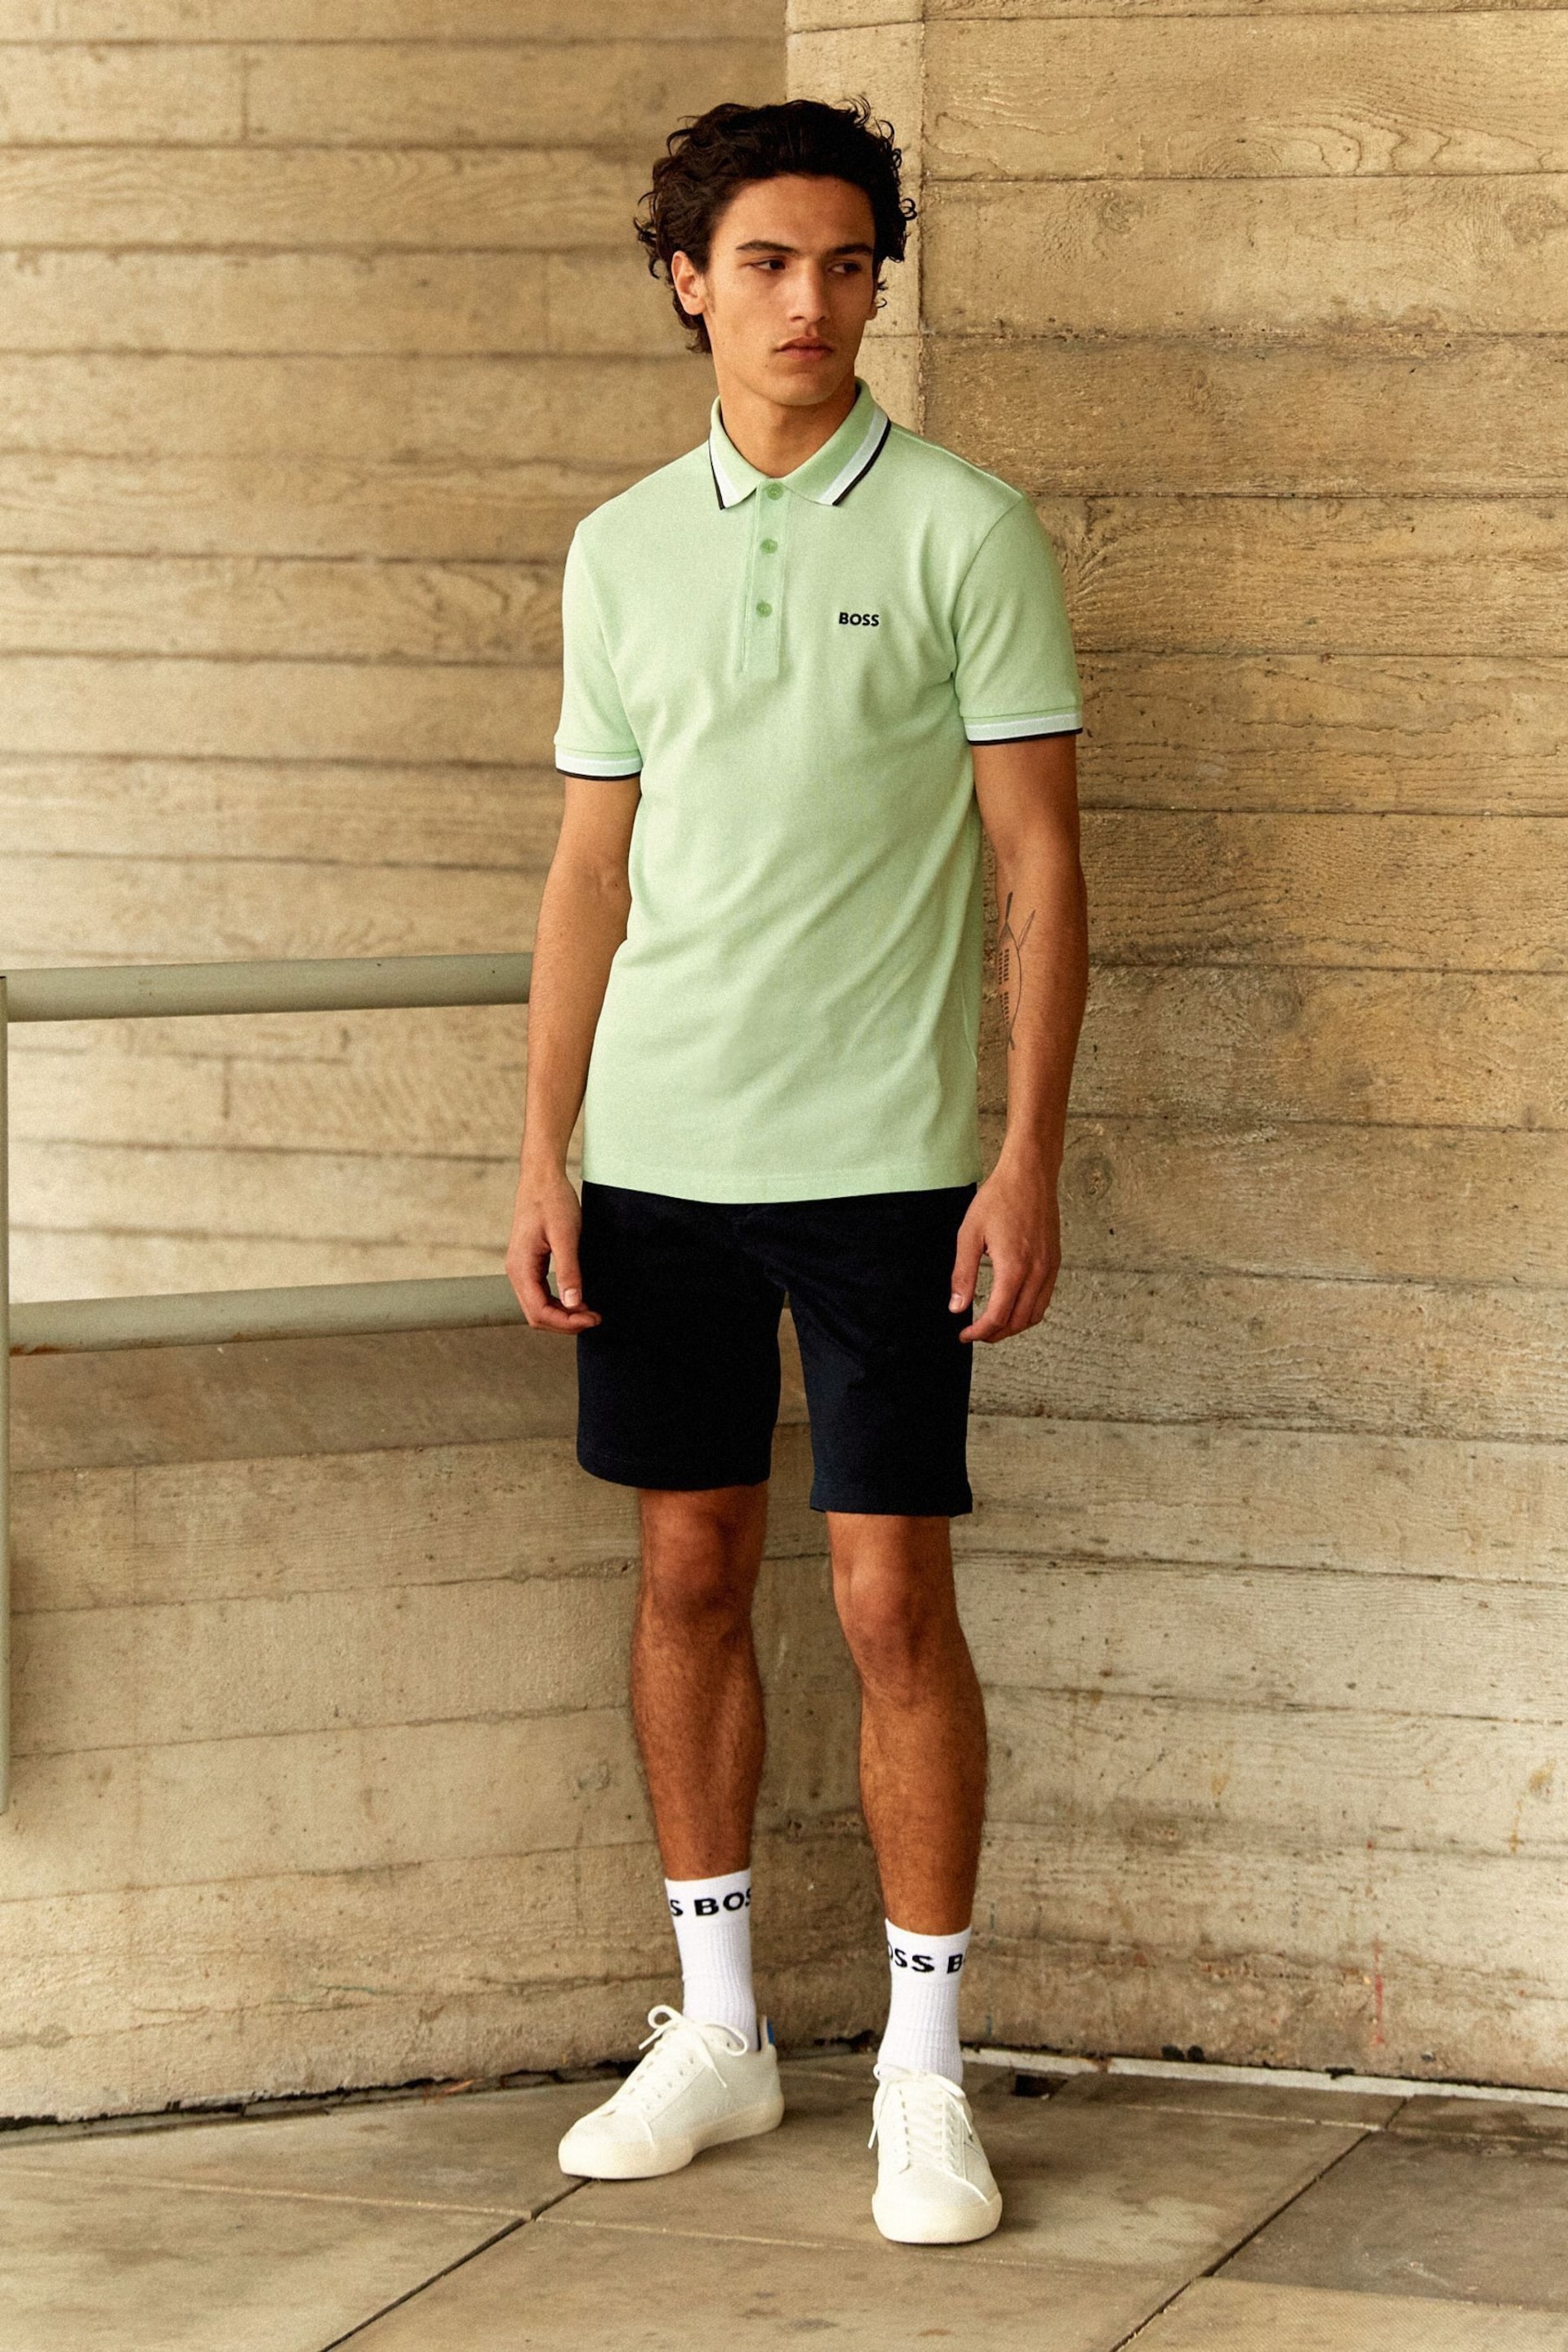 BOSS Bright Green Cotton Polo Shirt With Contrast Logo Details - Image 1 of 4